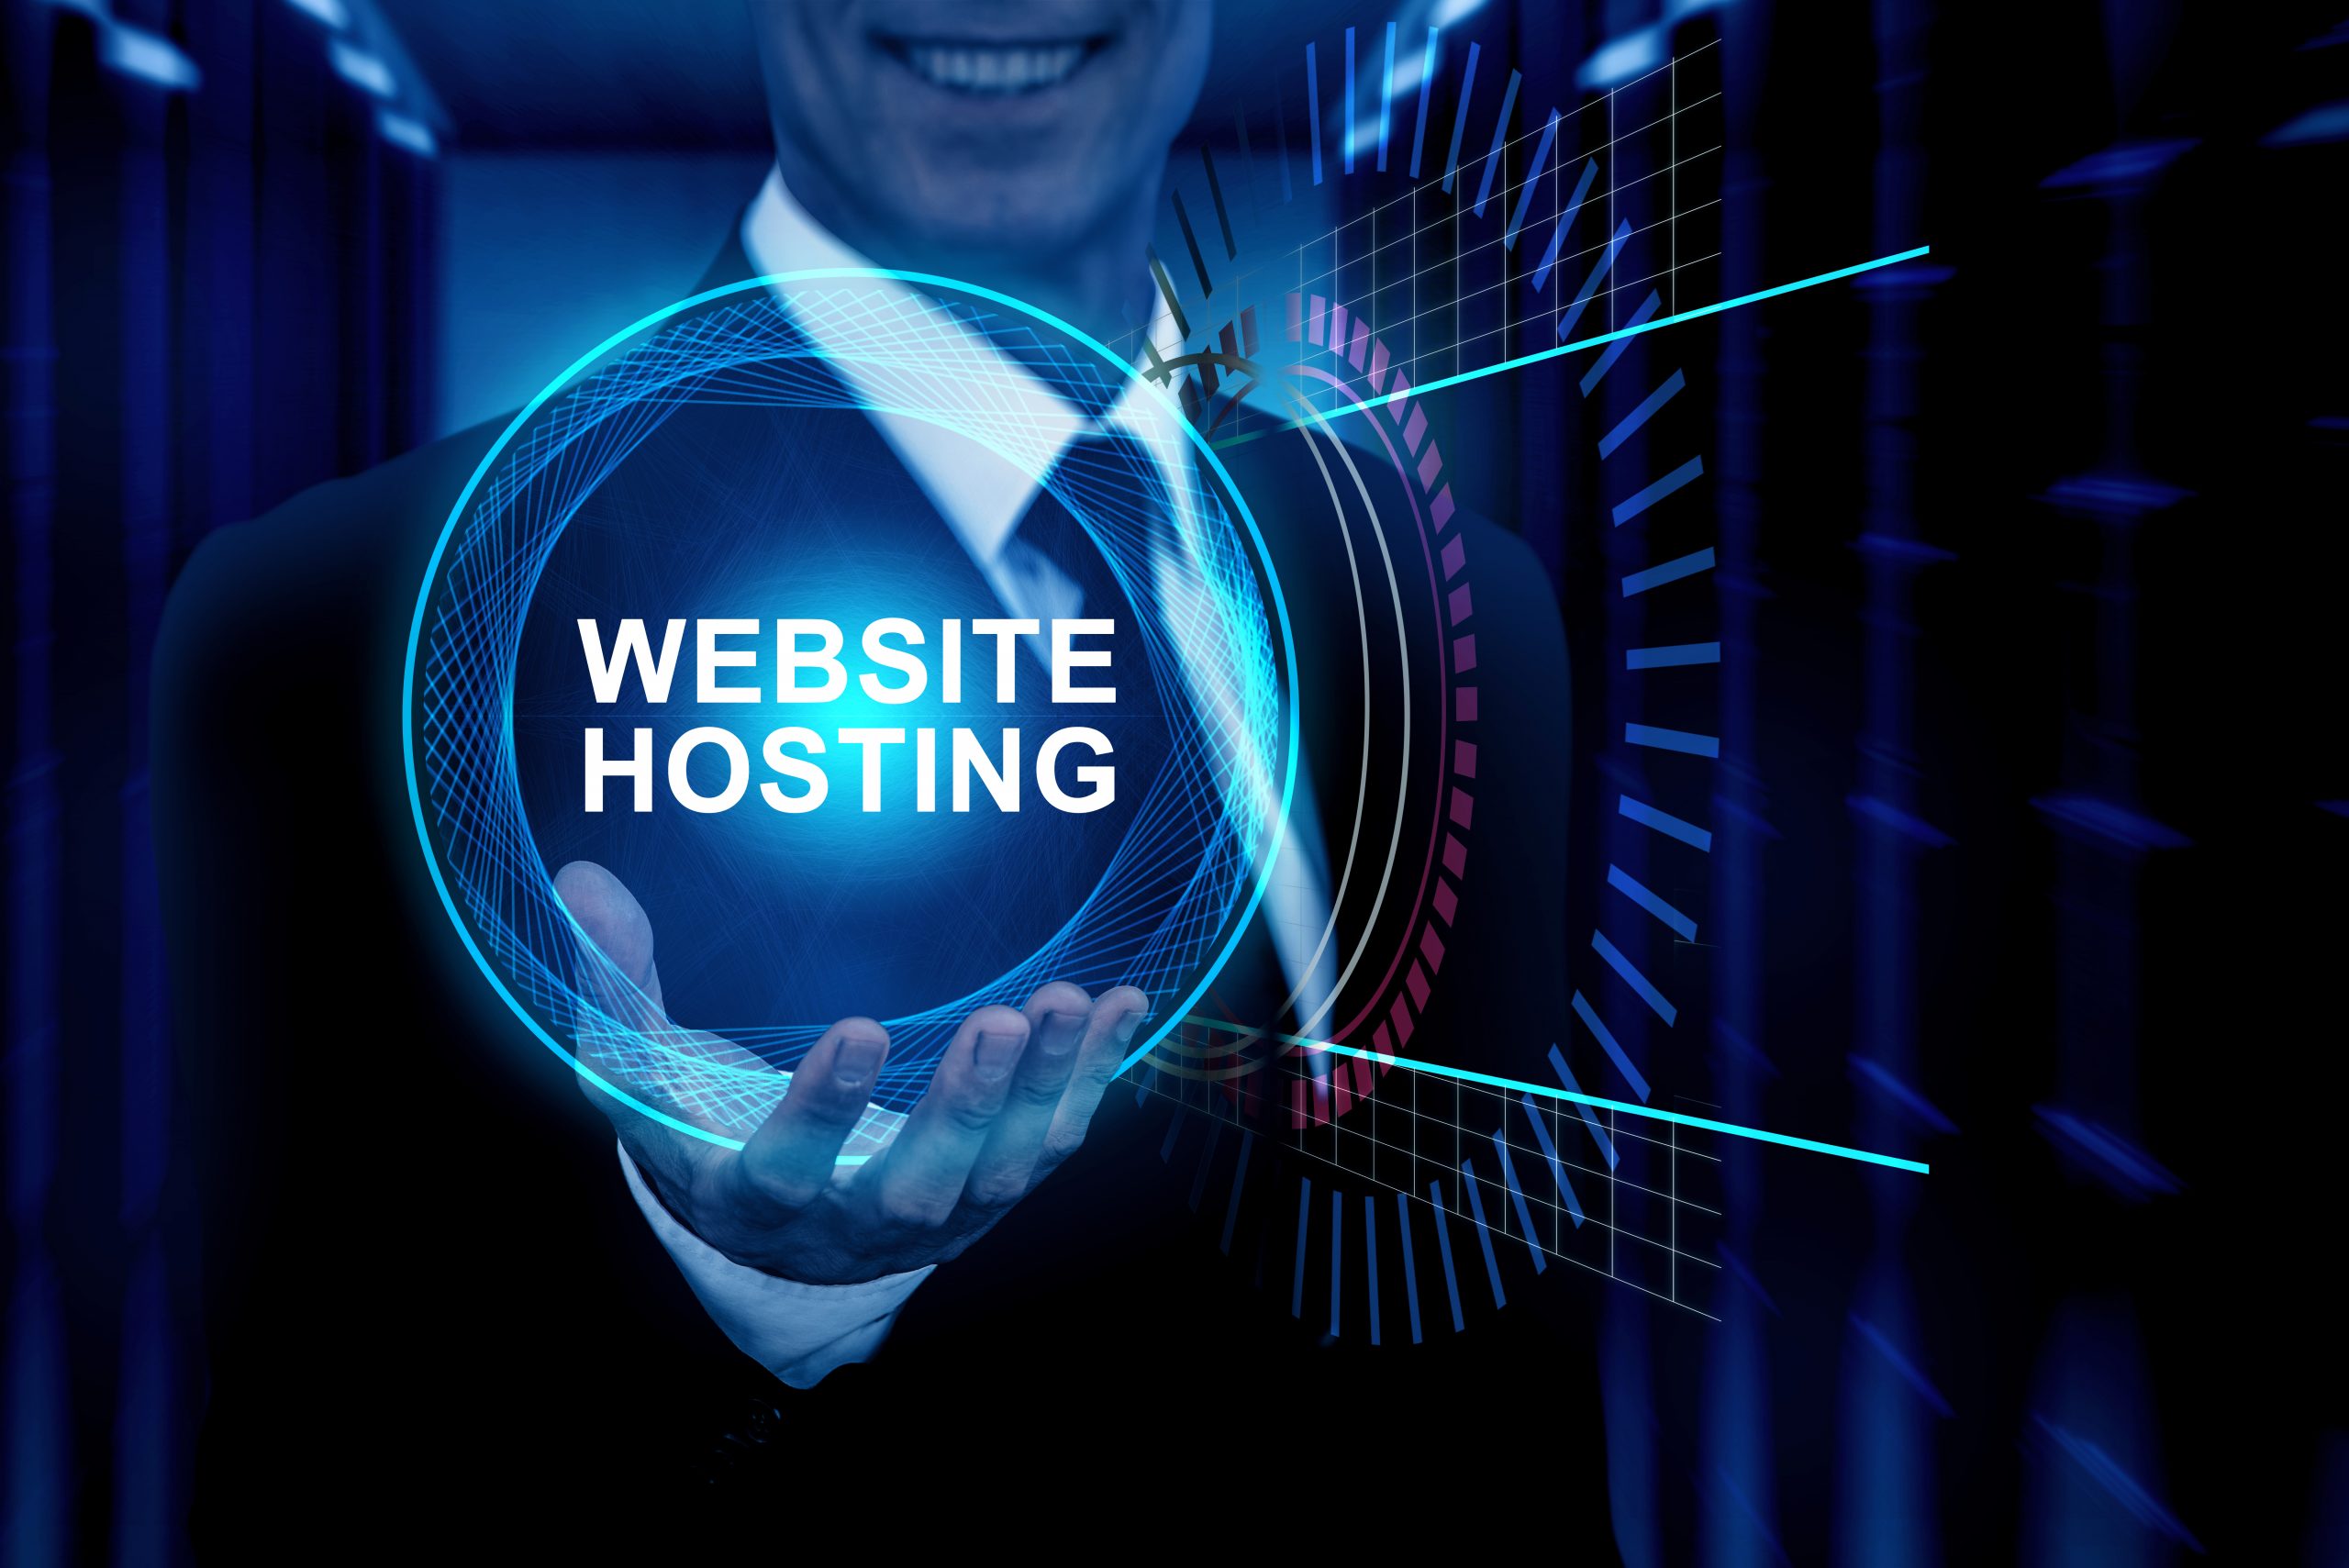 website-hosting-with-smiley-man-suit